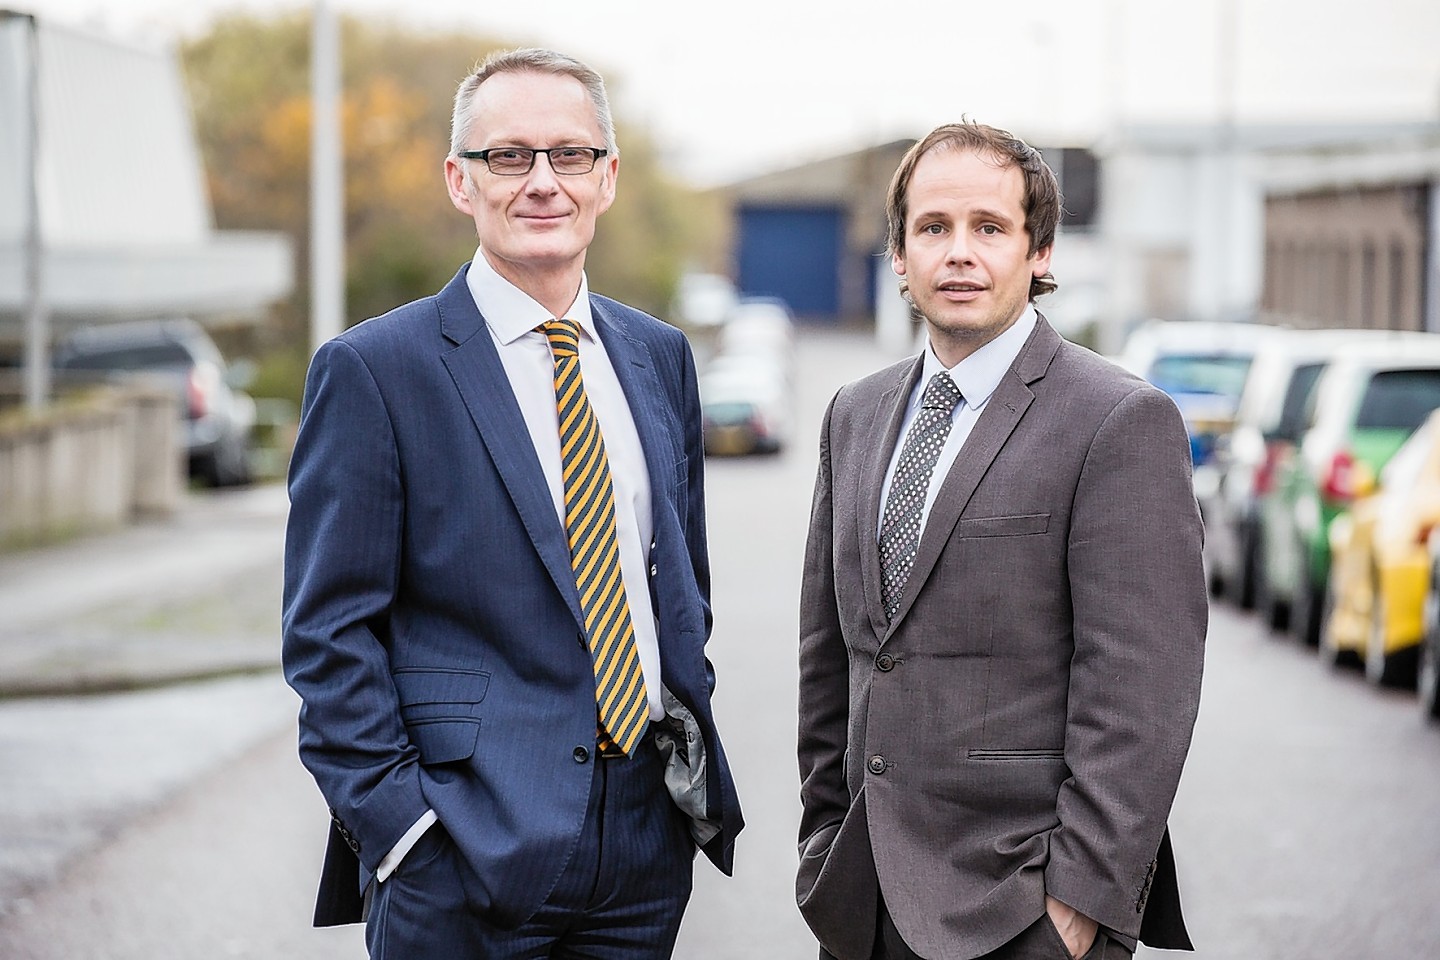 L to R - Andrew Hall, managing director of Jasmine Limited and Danny Cowie, managing director of Jasmine Holdings